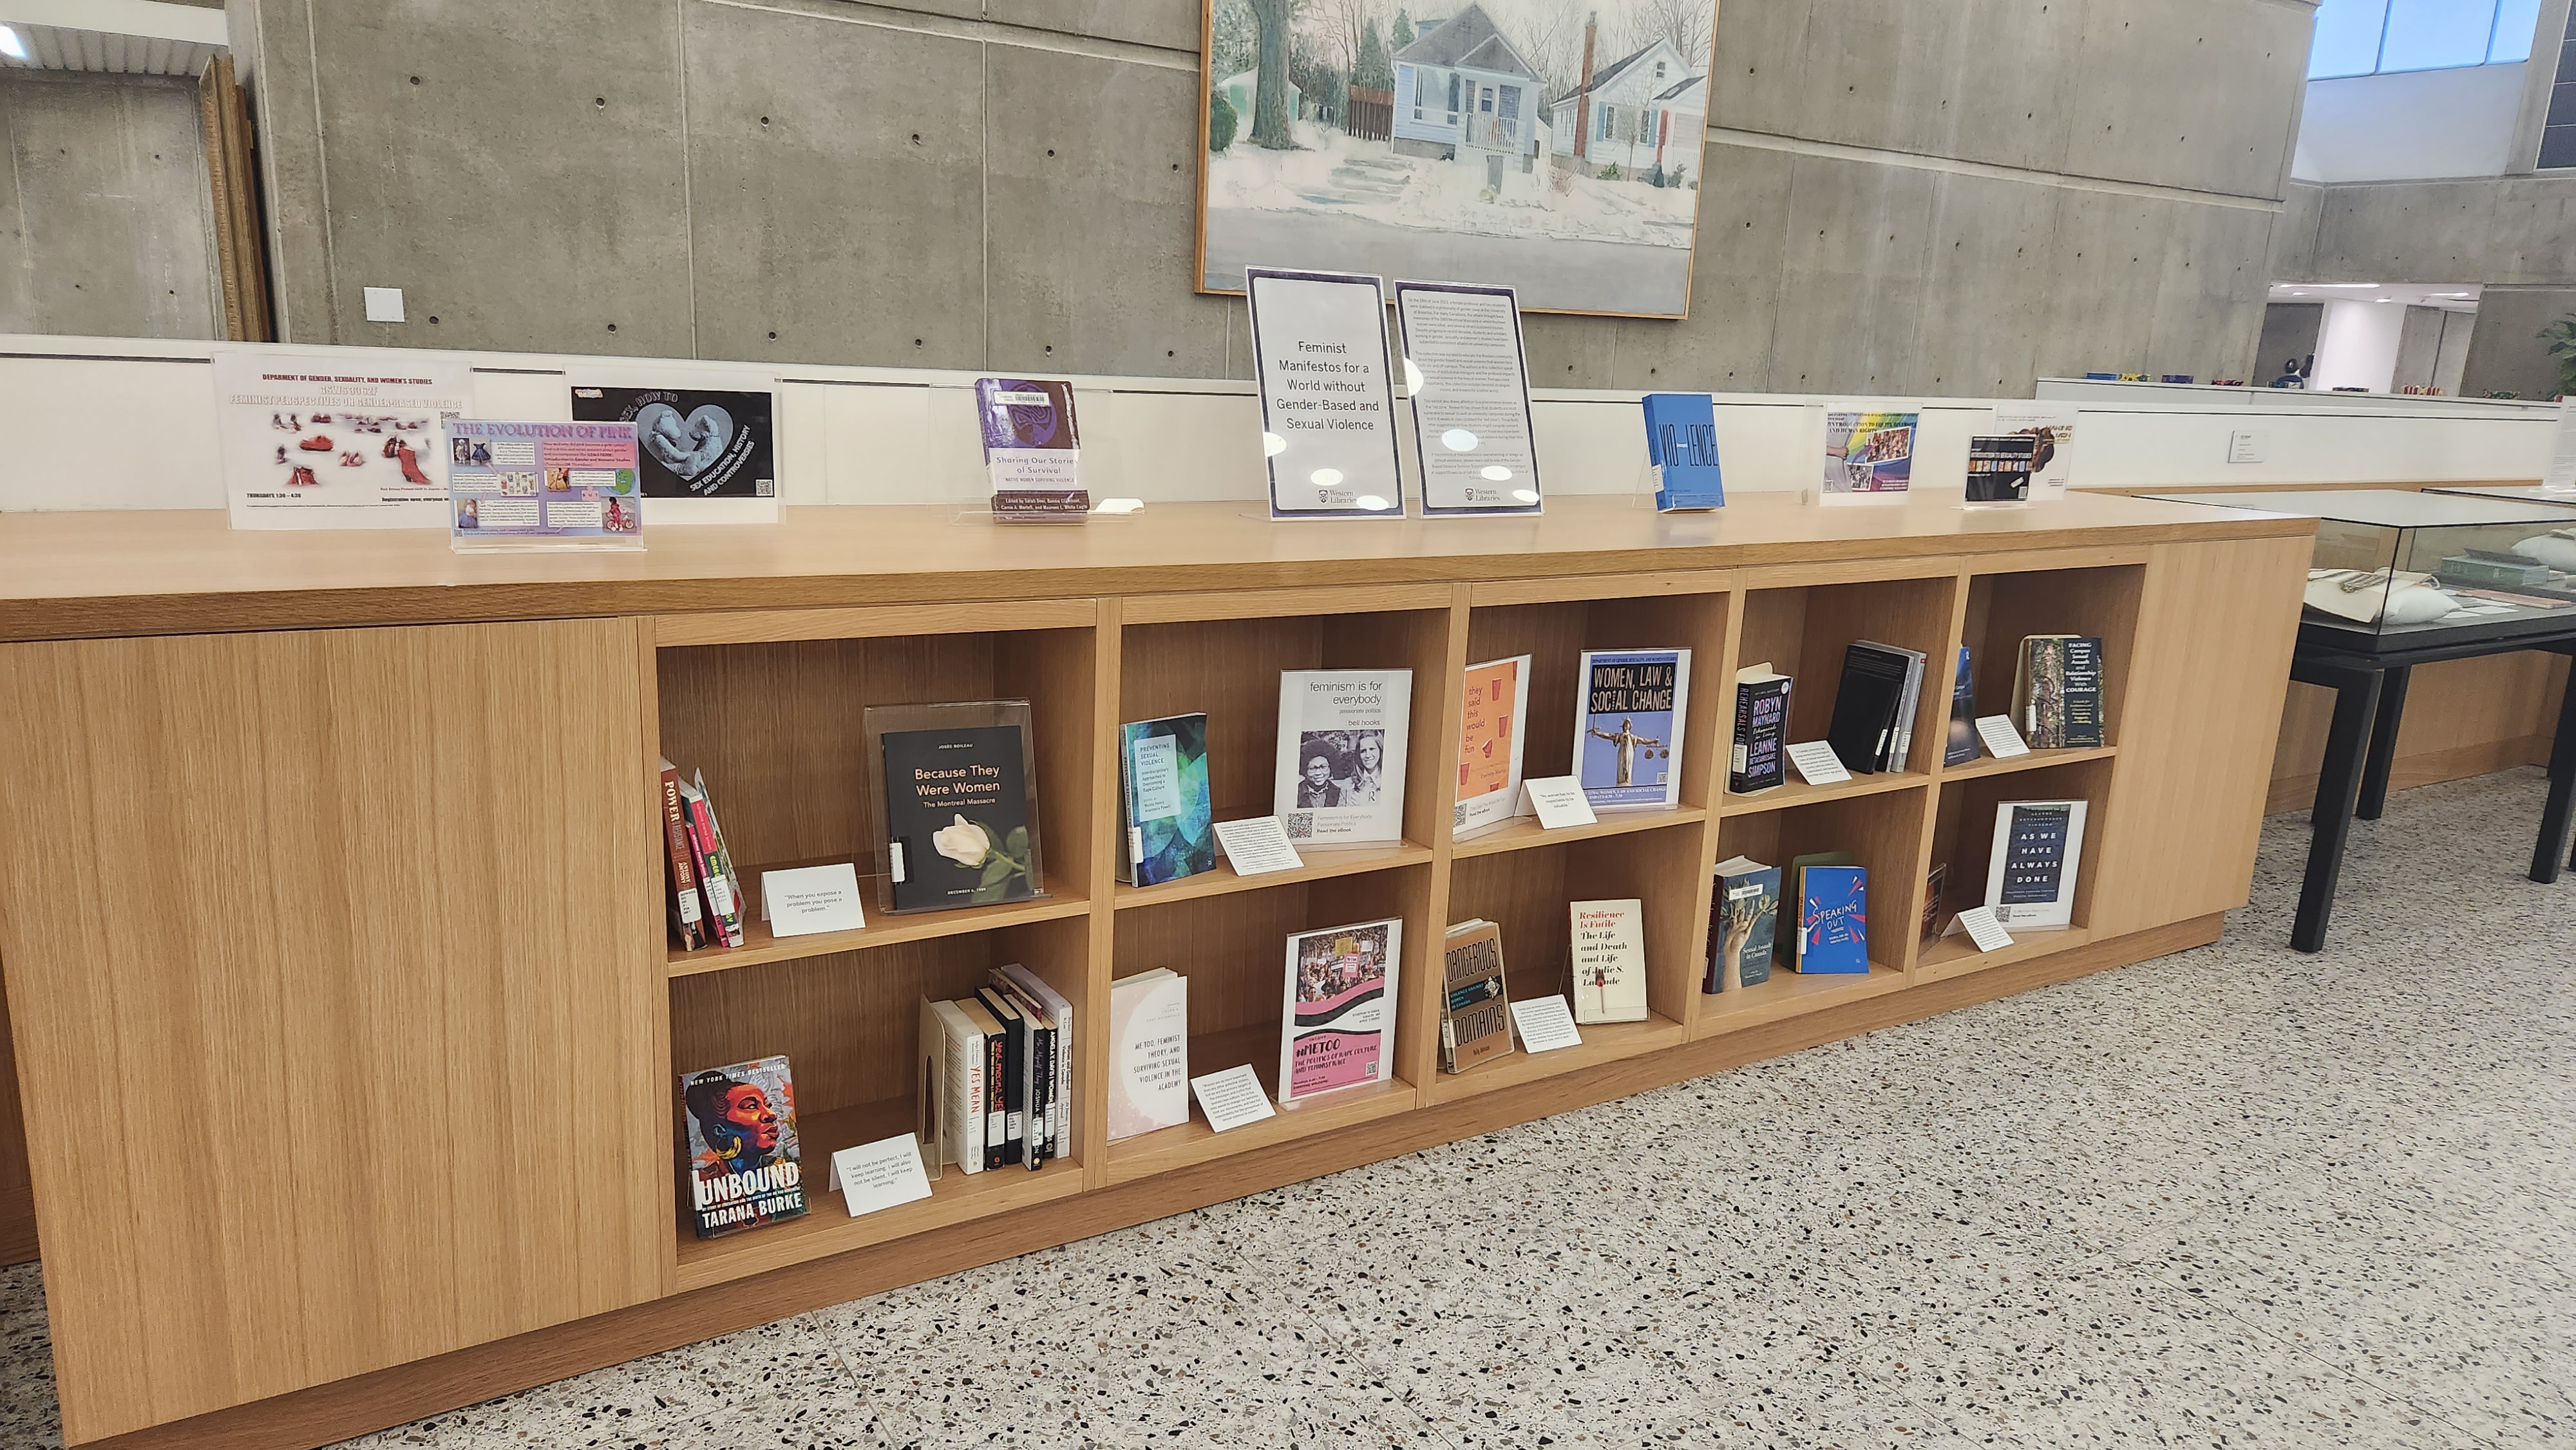 "A World without Gender-Based and Sexual Violence" book display.